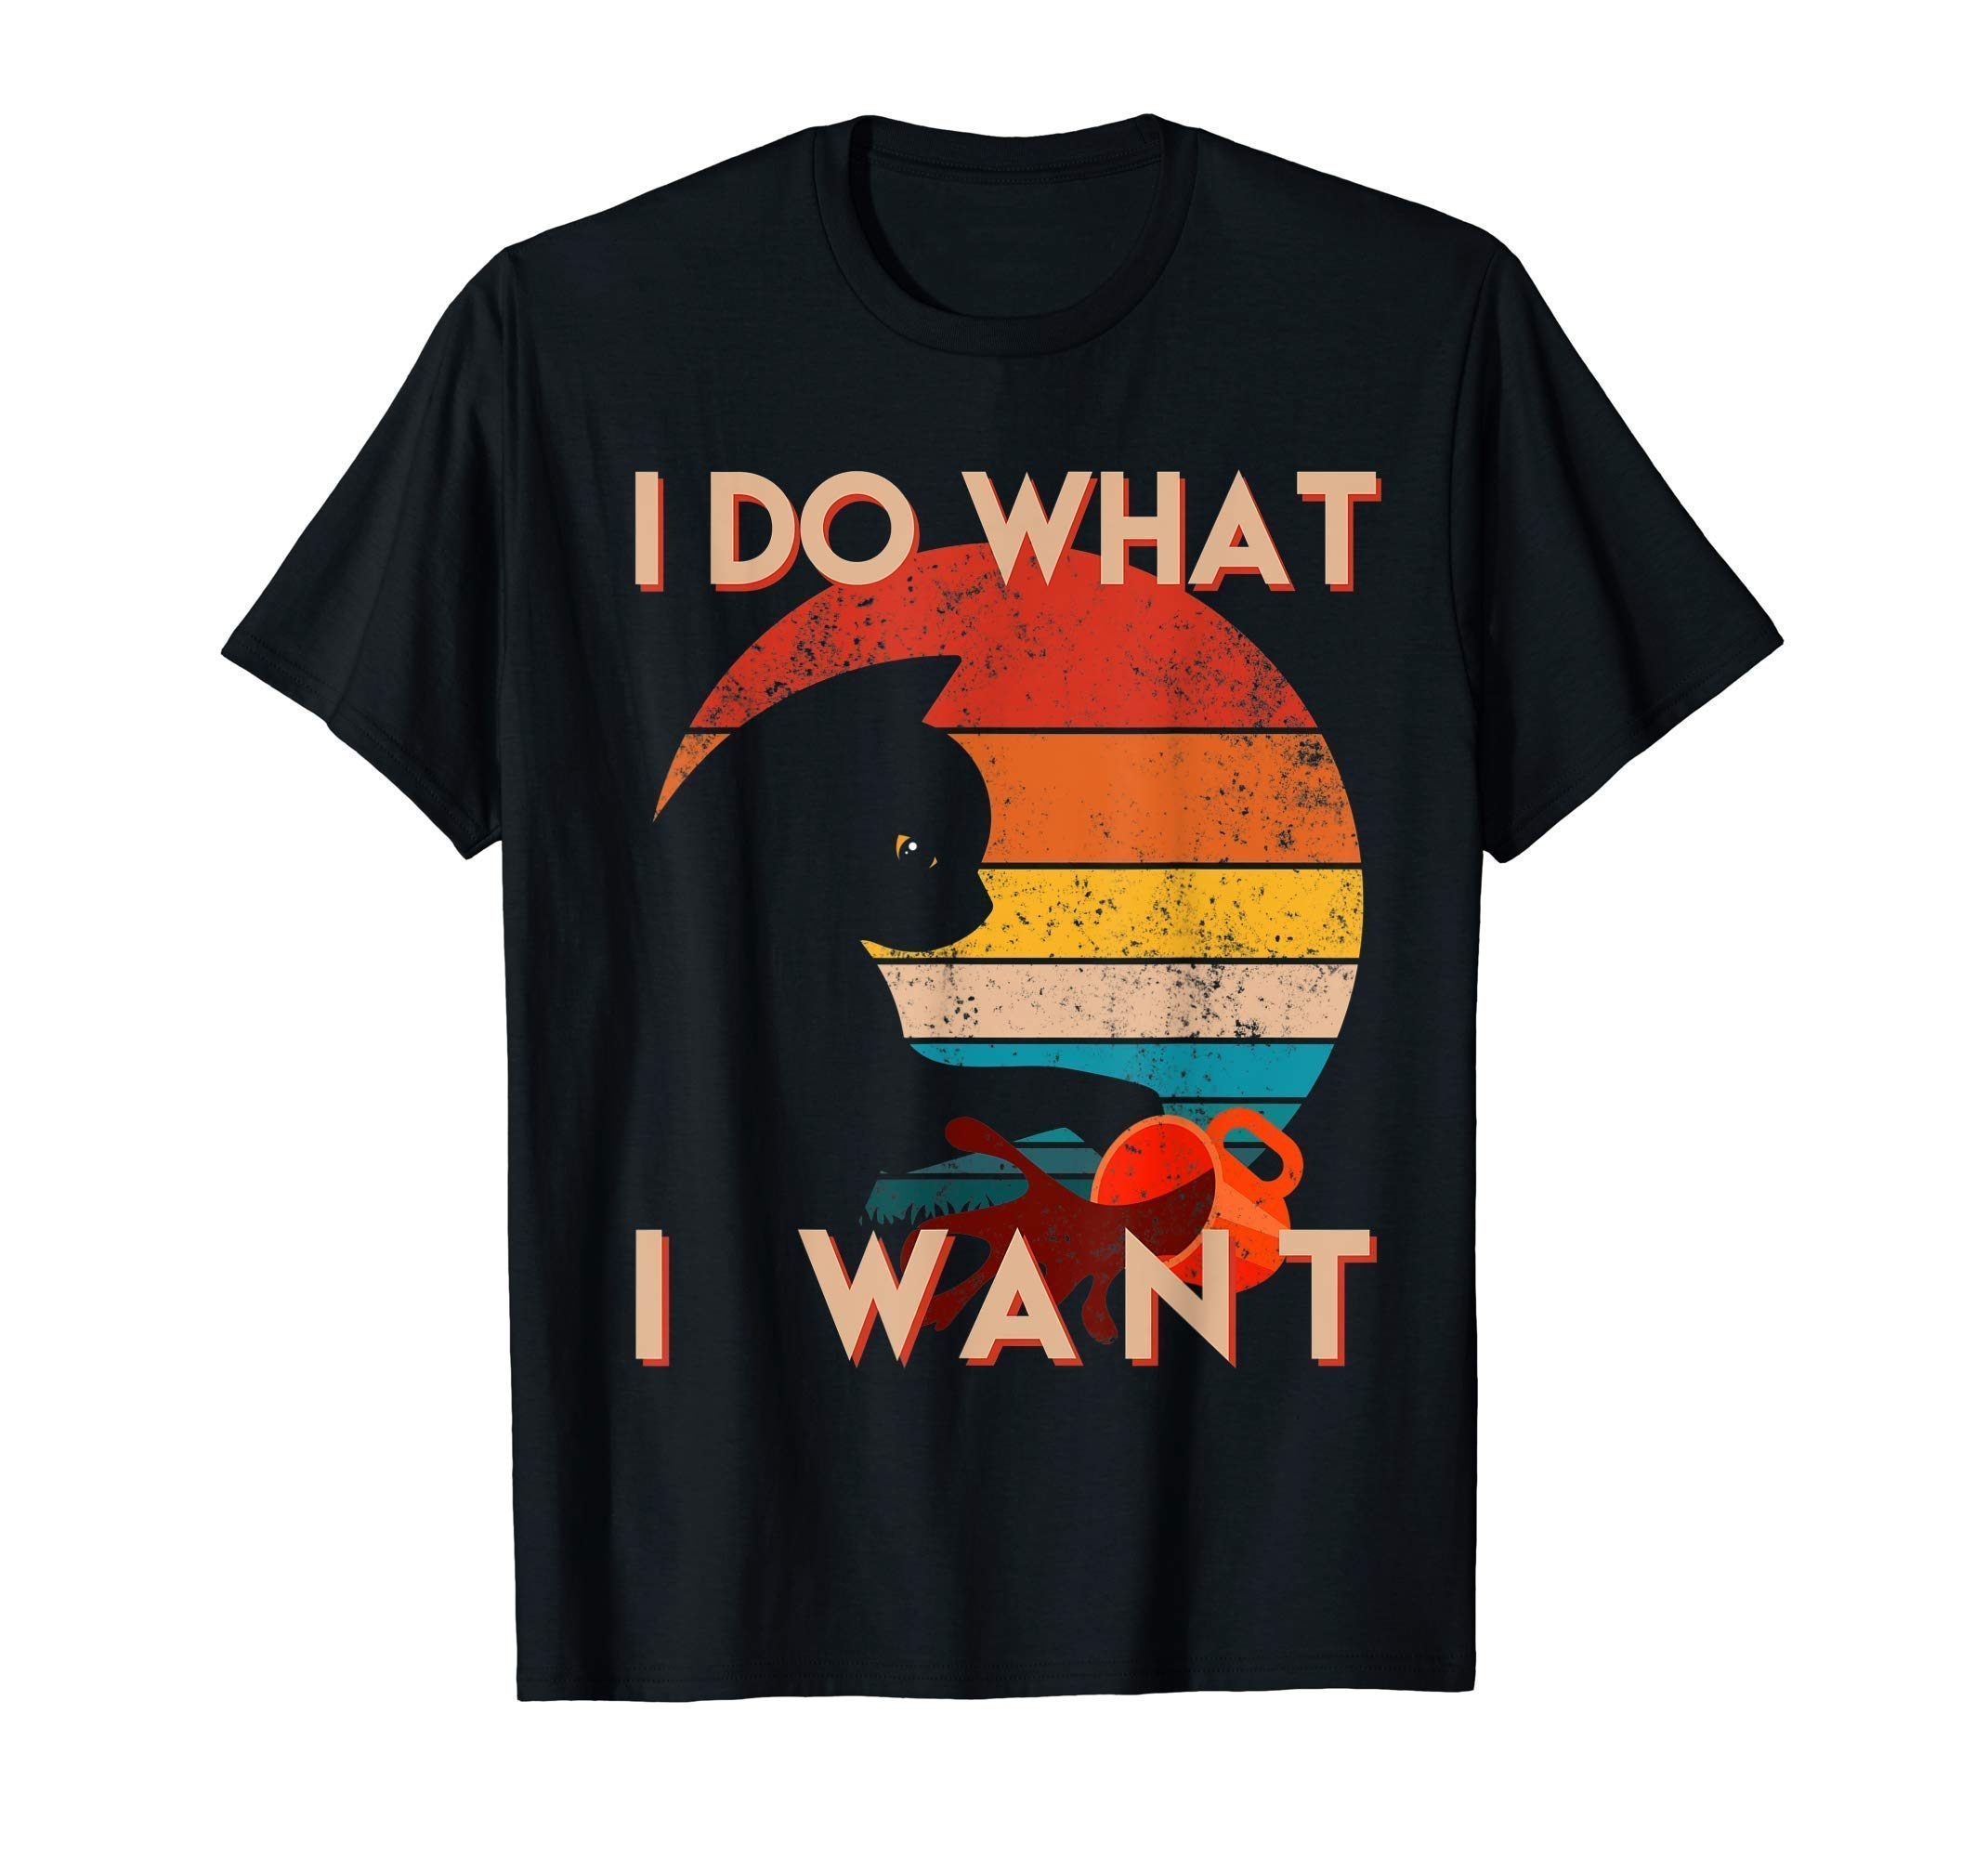 Vintage Cat Shirt I Do What I Want Cat T-Shirt - Reviewshirts Office